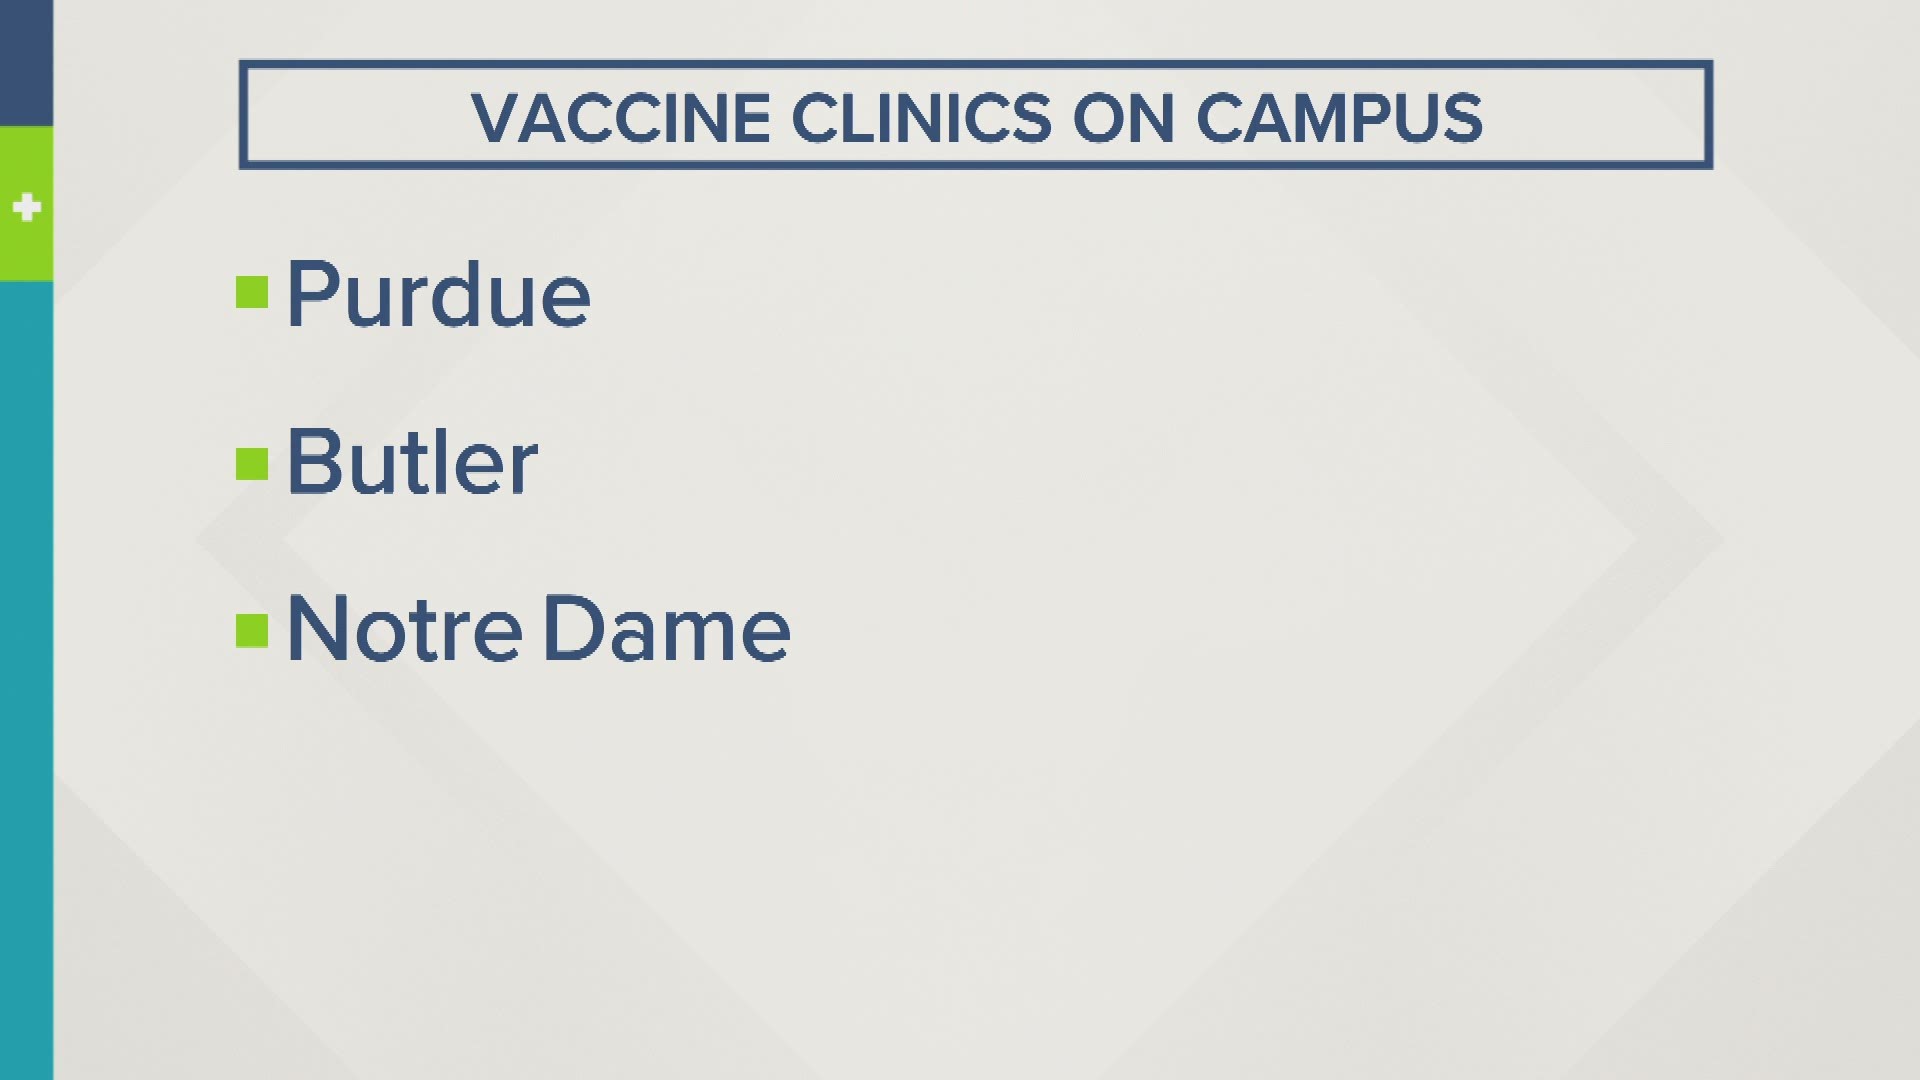 Purdue, Butler and Notre Dame are hosting vaccine clinics to encourage students to get vaccinated against COVID-19.